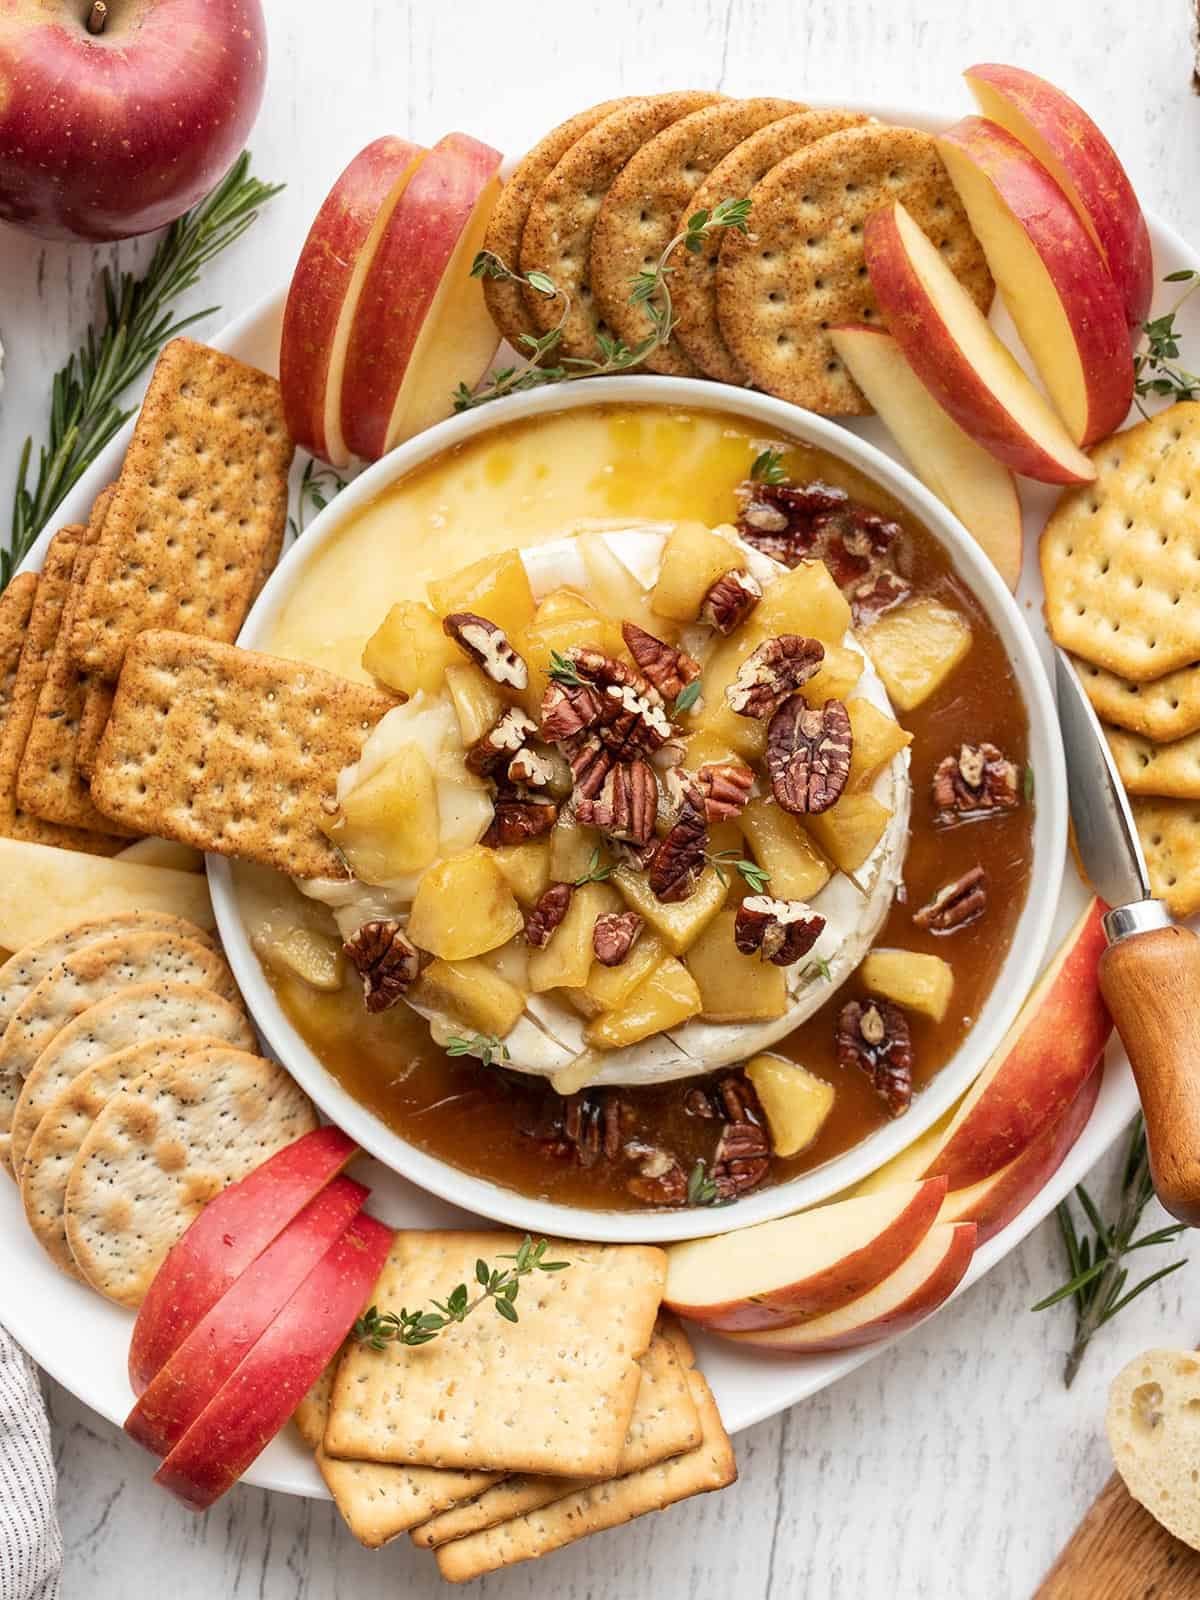 Baked brie surrounded by crackers and apples